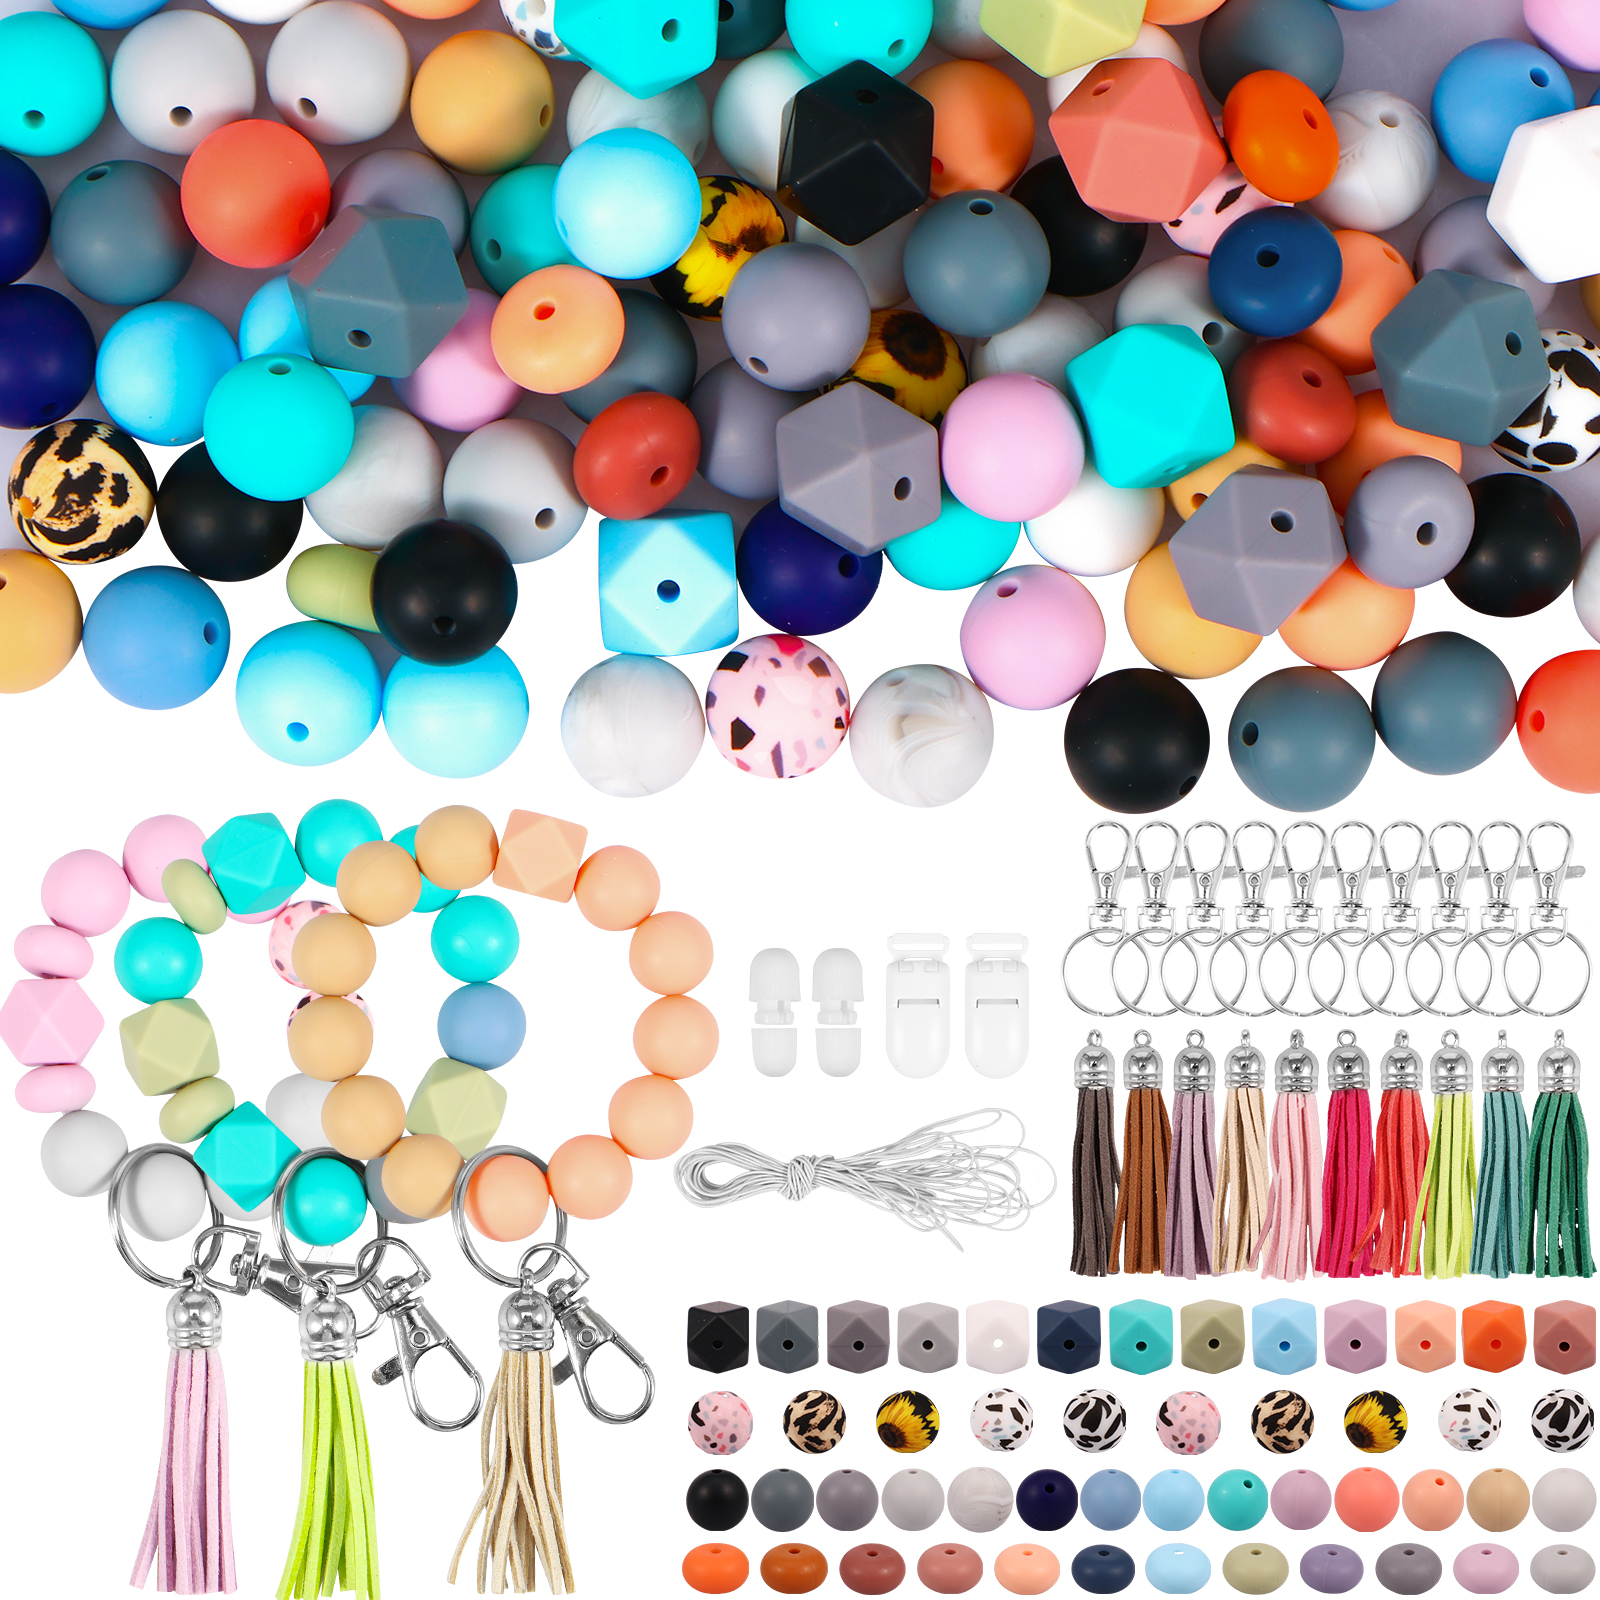 JTWEEN 235 Pcs Silicone Beads Multiple Styles and Shapes Silicone